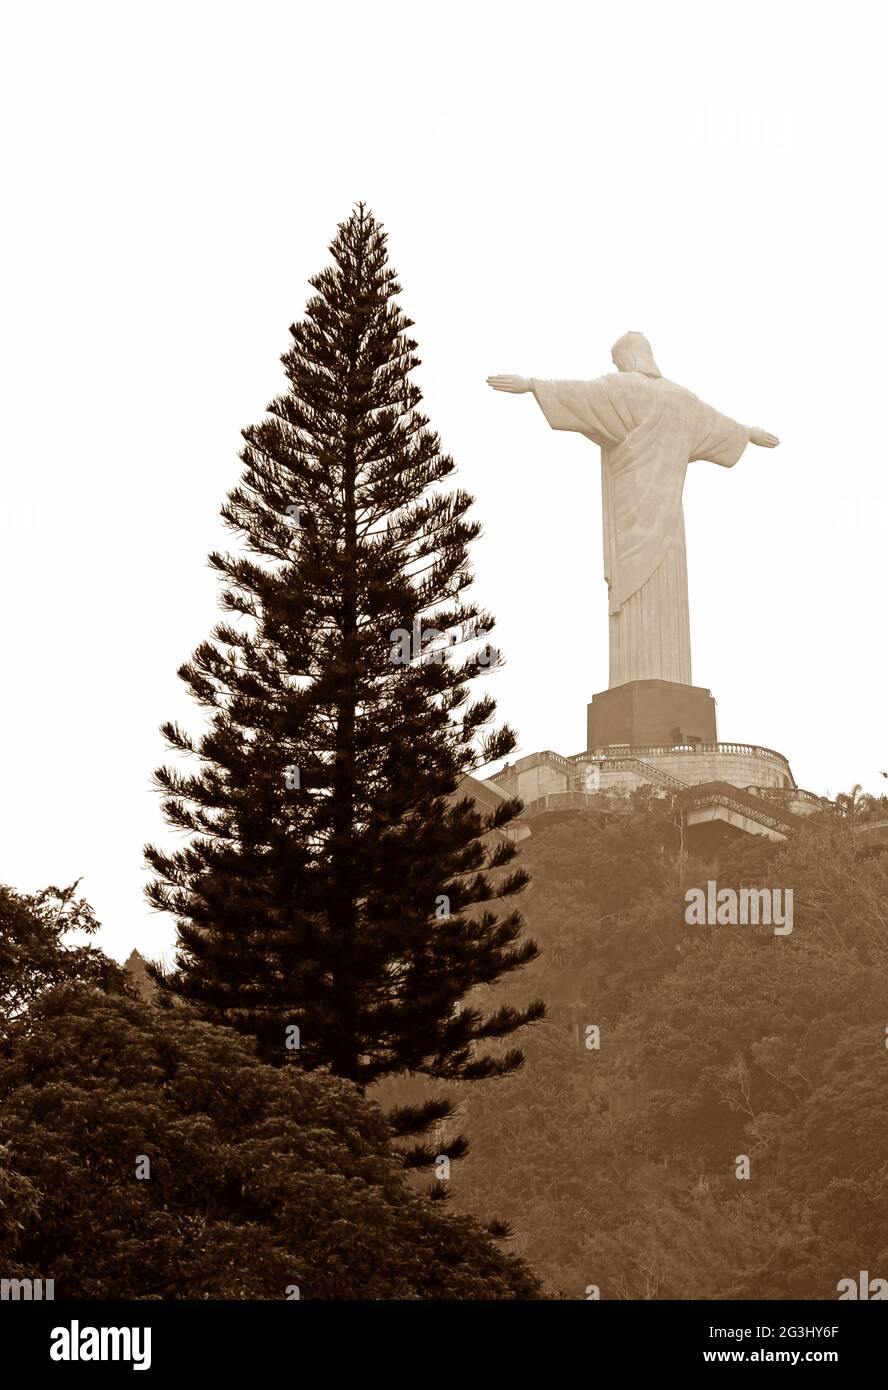 Sepia Image of Christ the Redeemer Statue, One of the New 7 Wonders of the World, Corcovado Mountain, Rio de Janeiro of Brazil Stock Photo